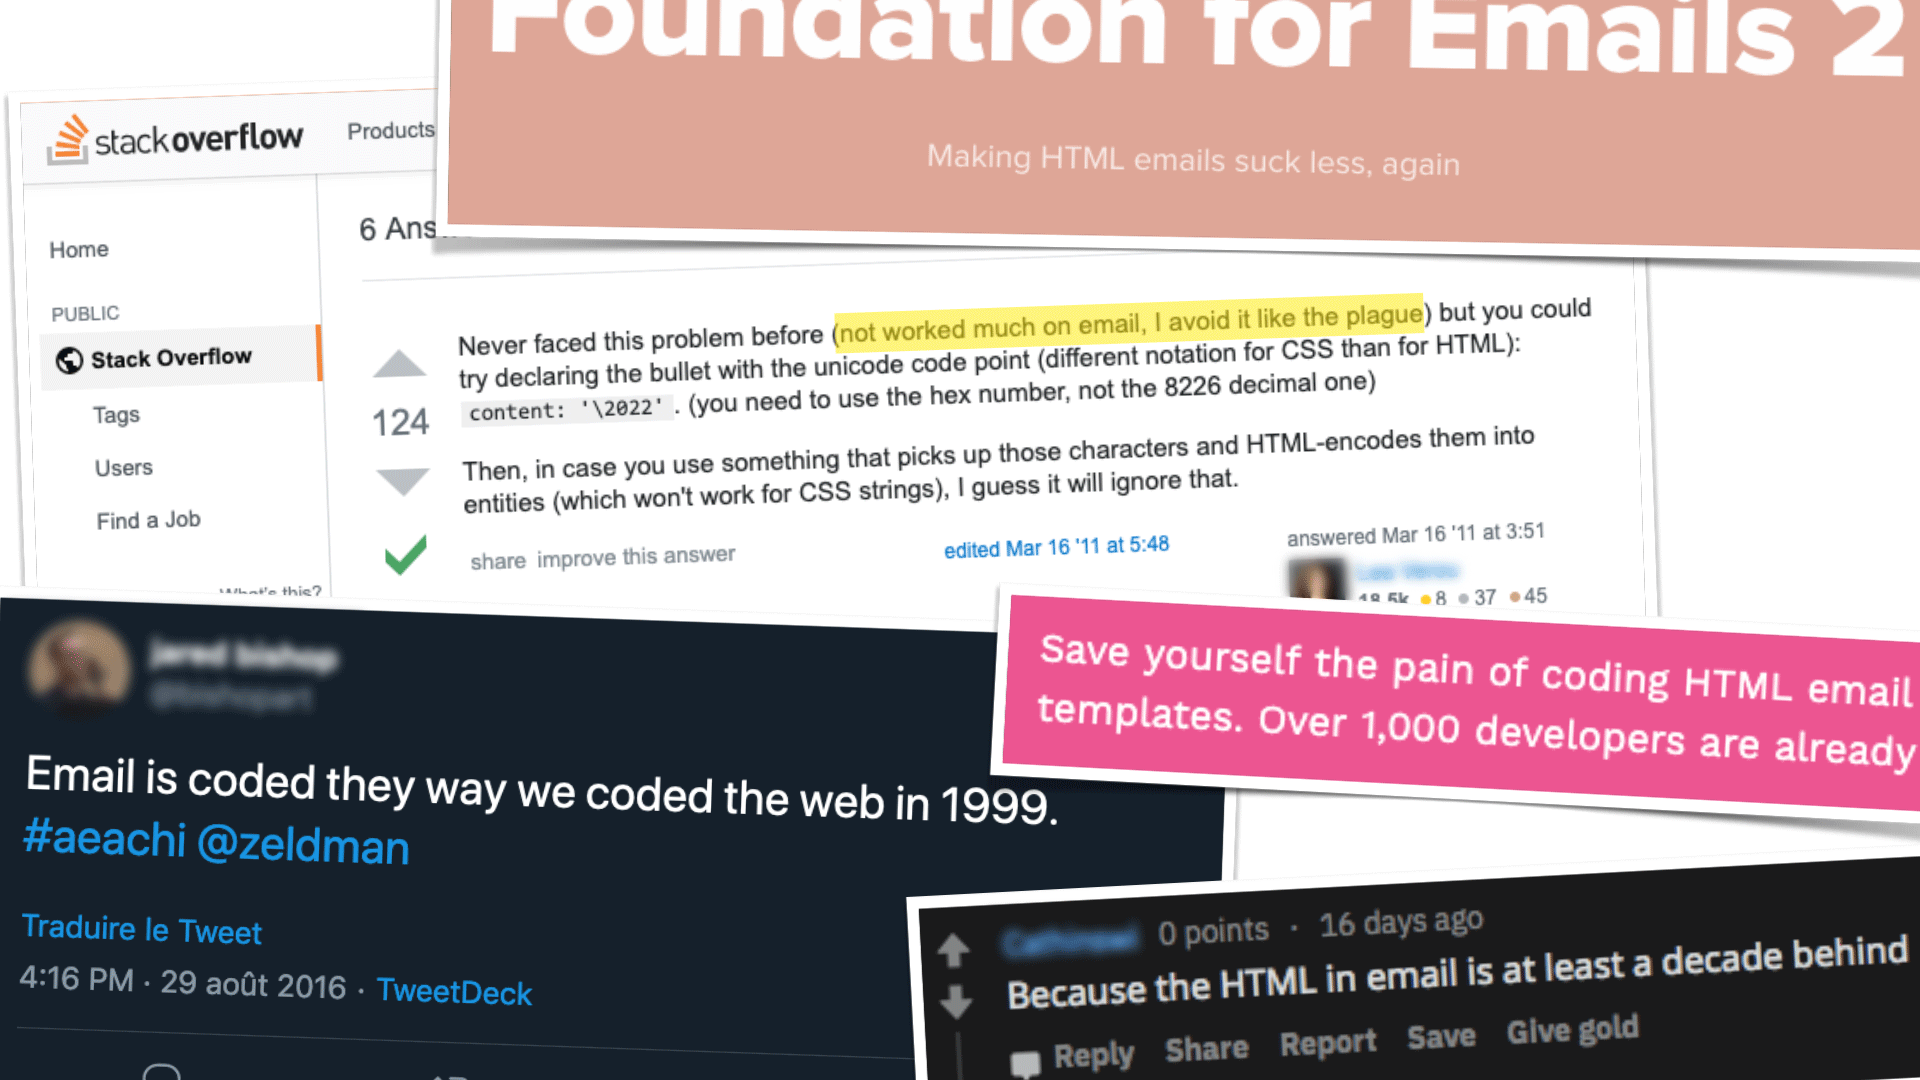 &ldquo;Email is coded the way we coded the web in 1999&rdquo; and other snarky comments about HTML emails